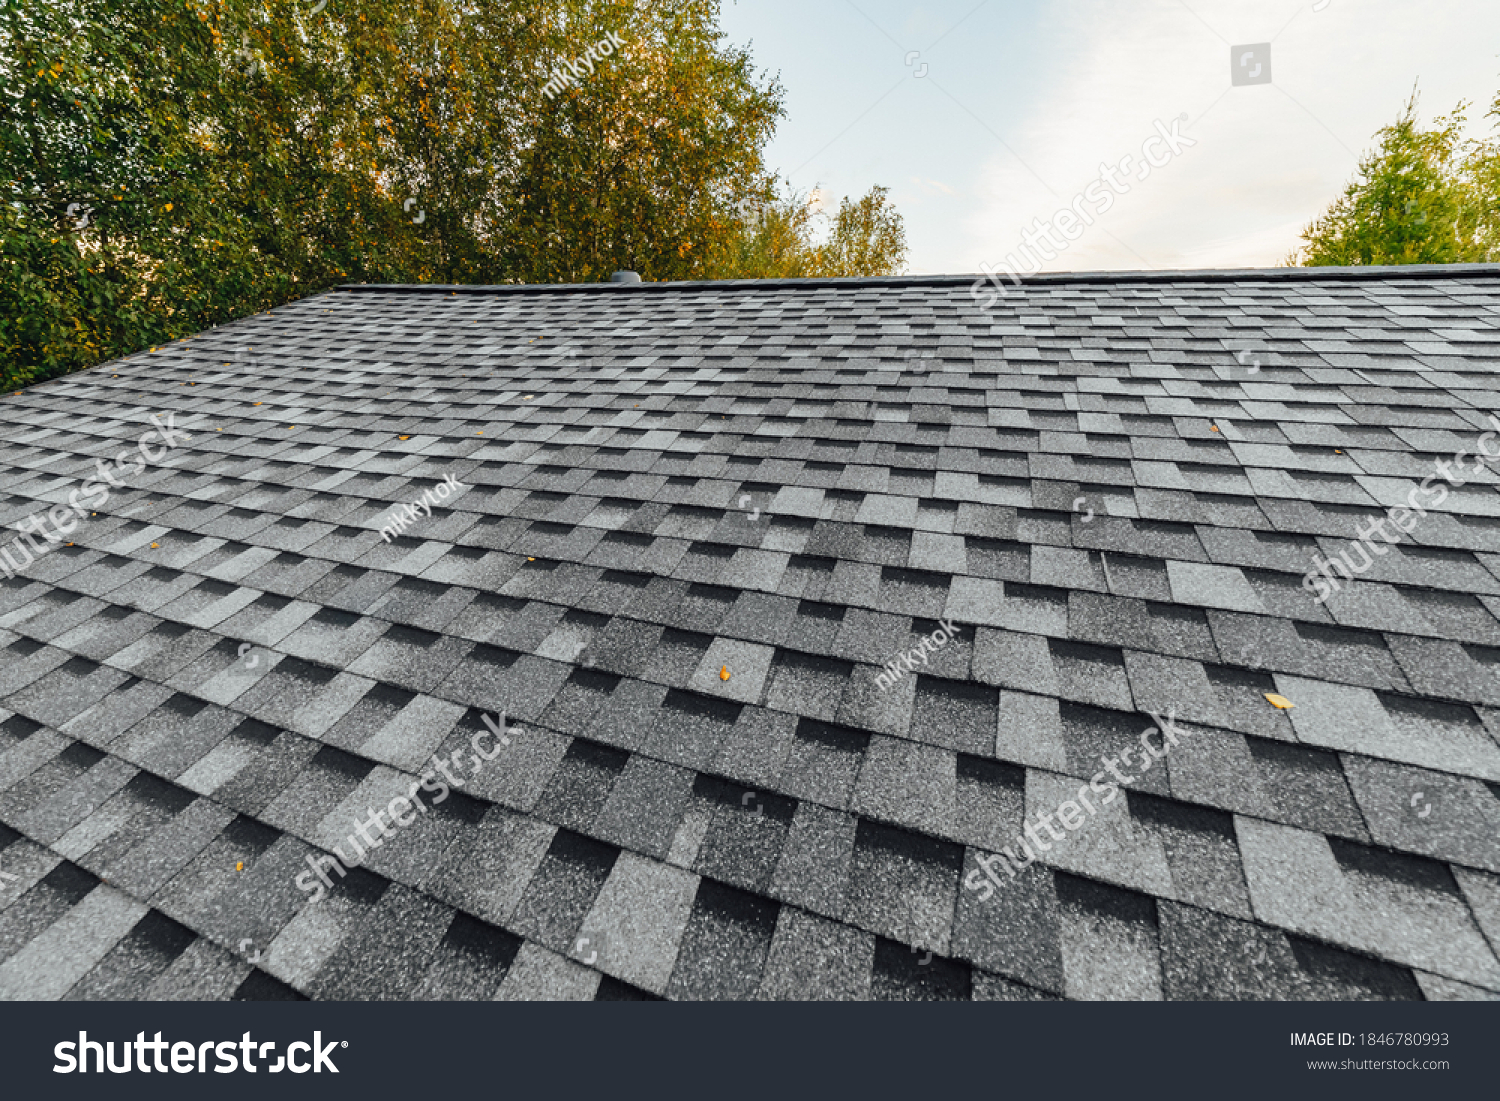 new renovated roof covered with shingles flat polymeric roof-tiles #1846780993